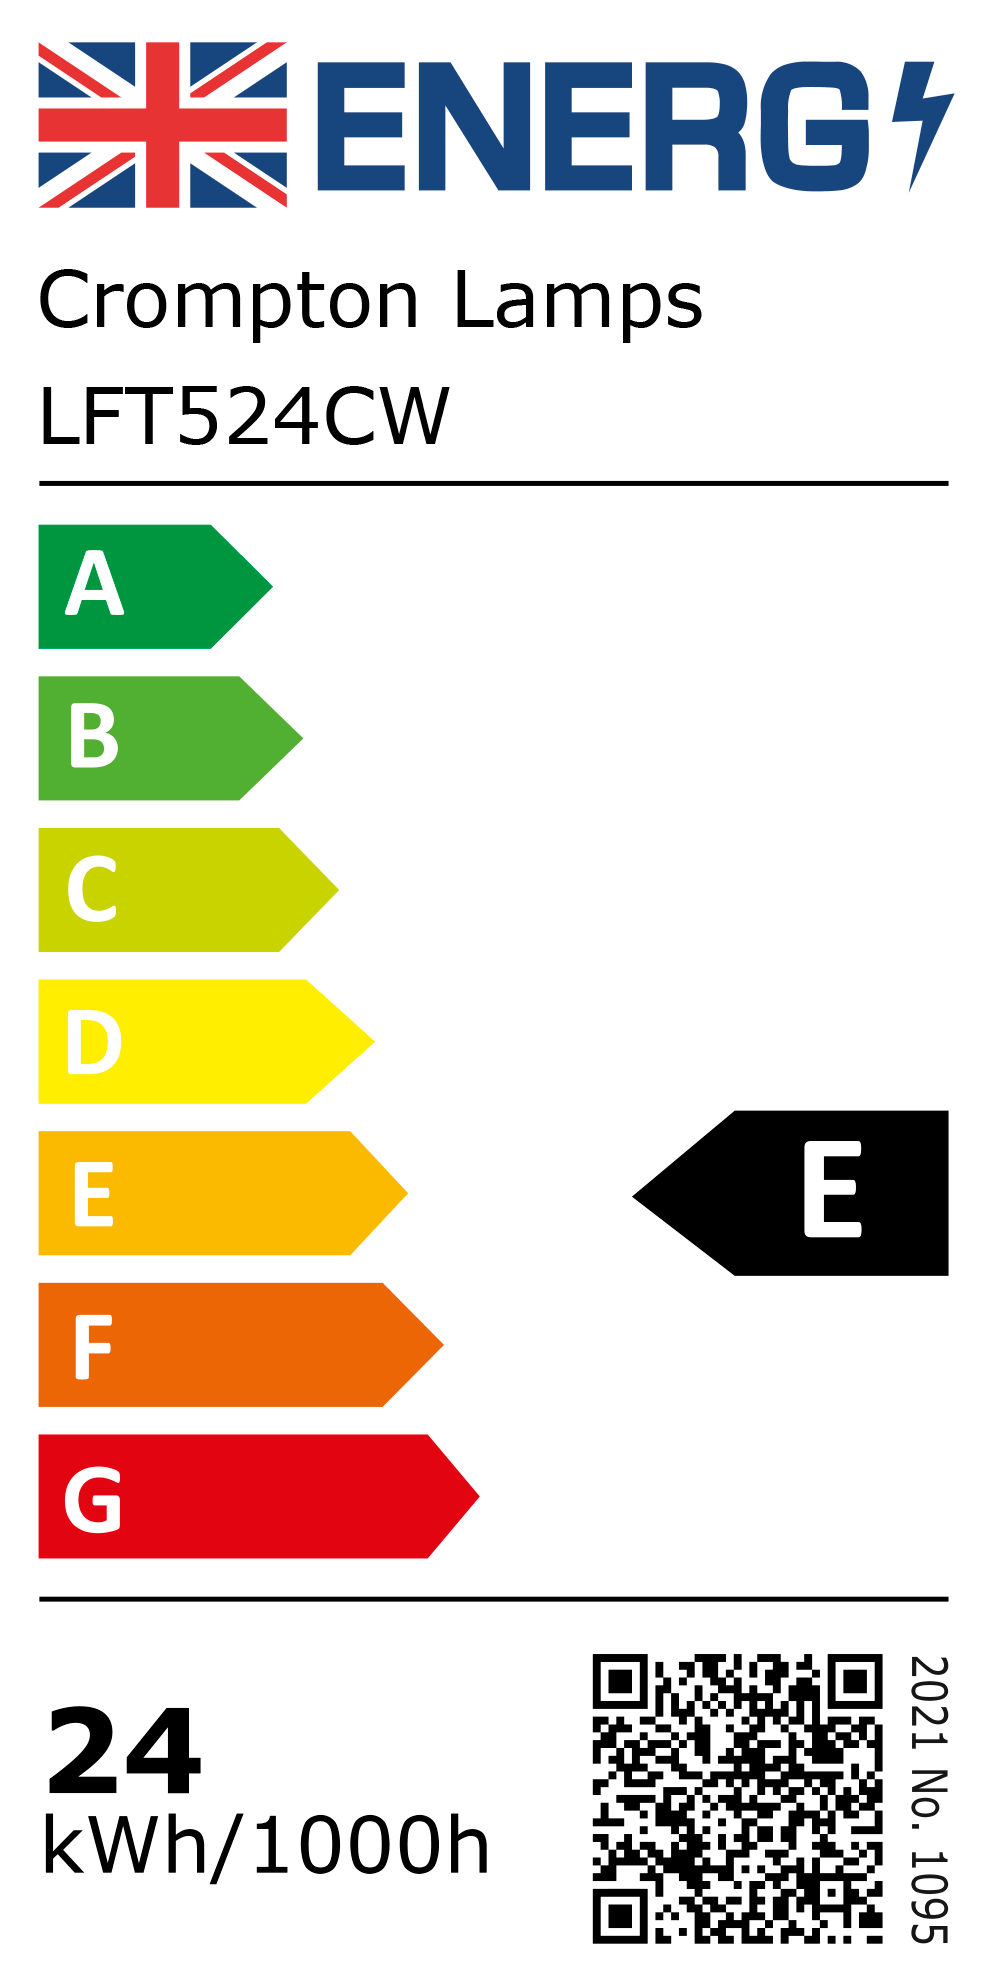 New 2021 Energy Rating Label: Stock Code LFT524CW